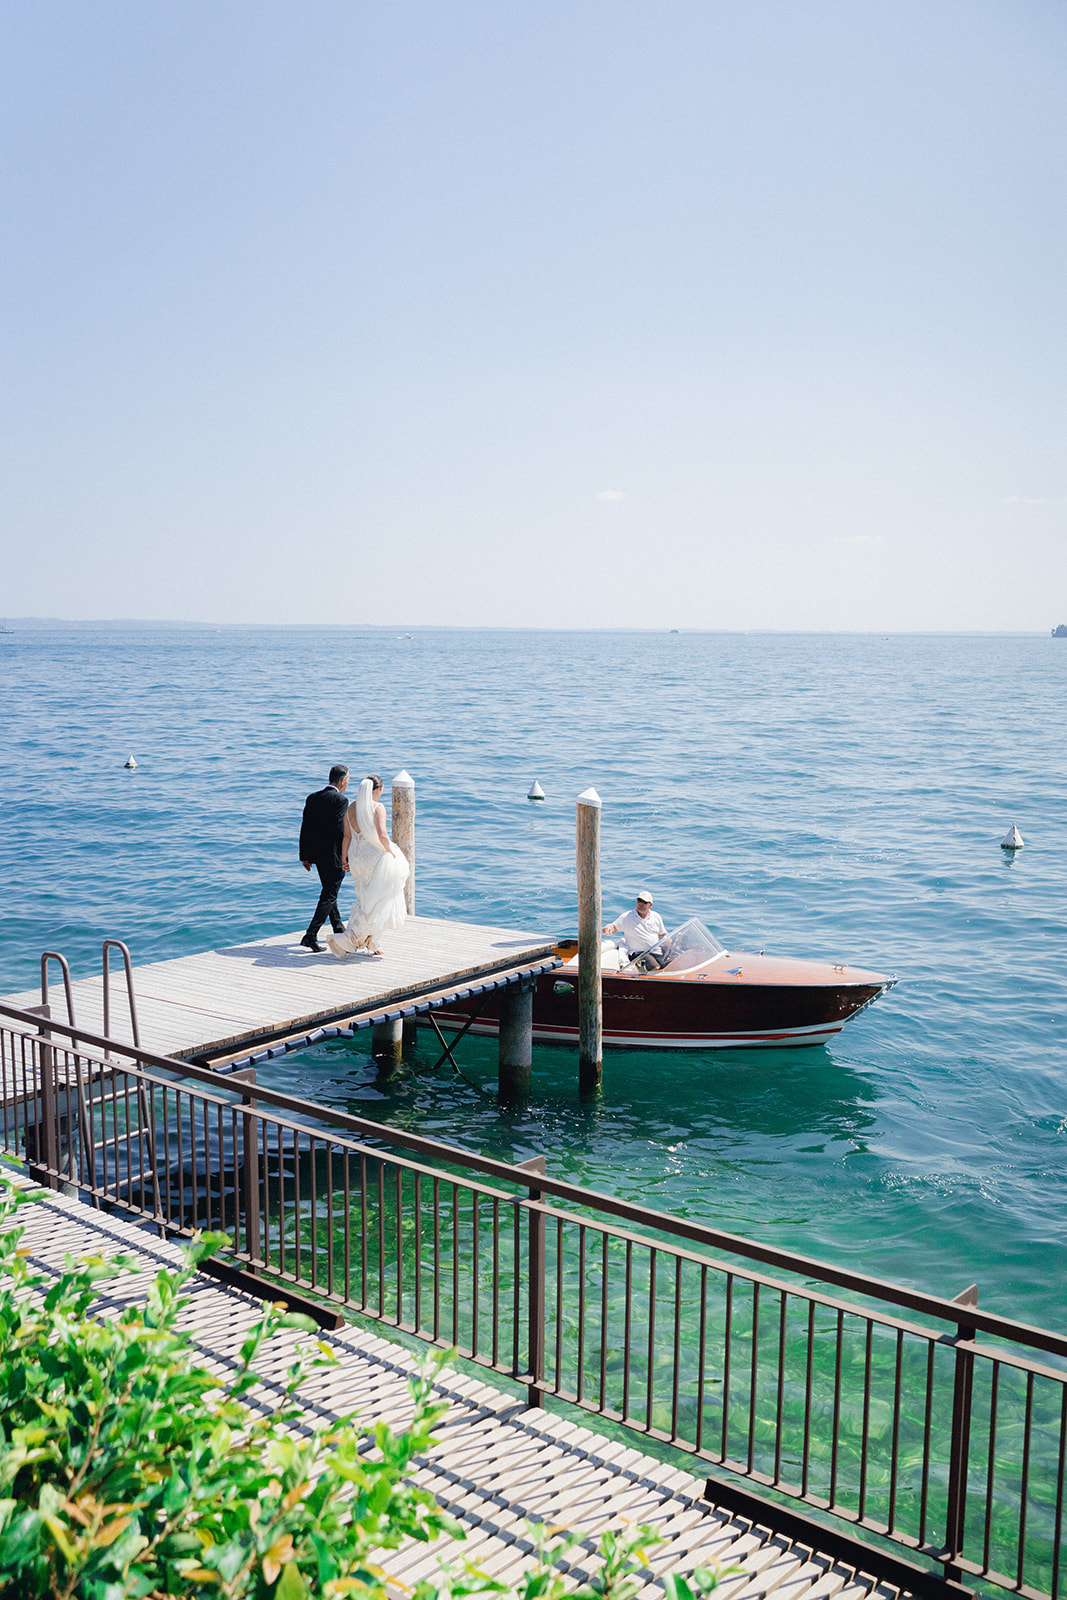 The bride and her father board the boat at the dock of Hotel Bellariva to reach the wedding ceremony at Isola del Garda